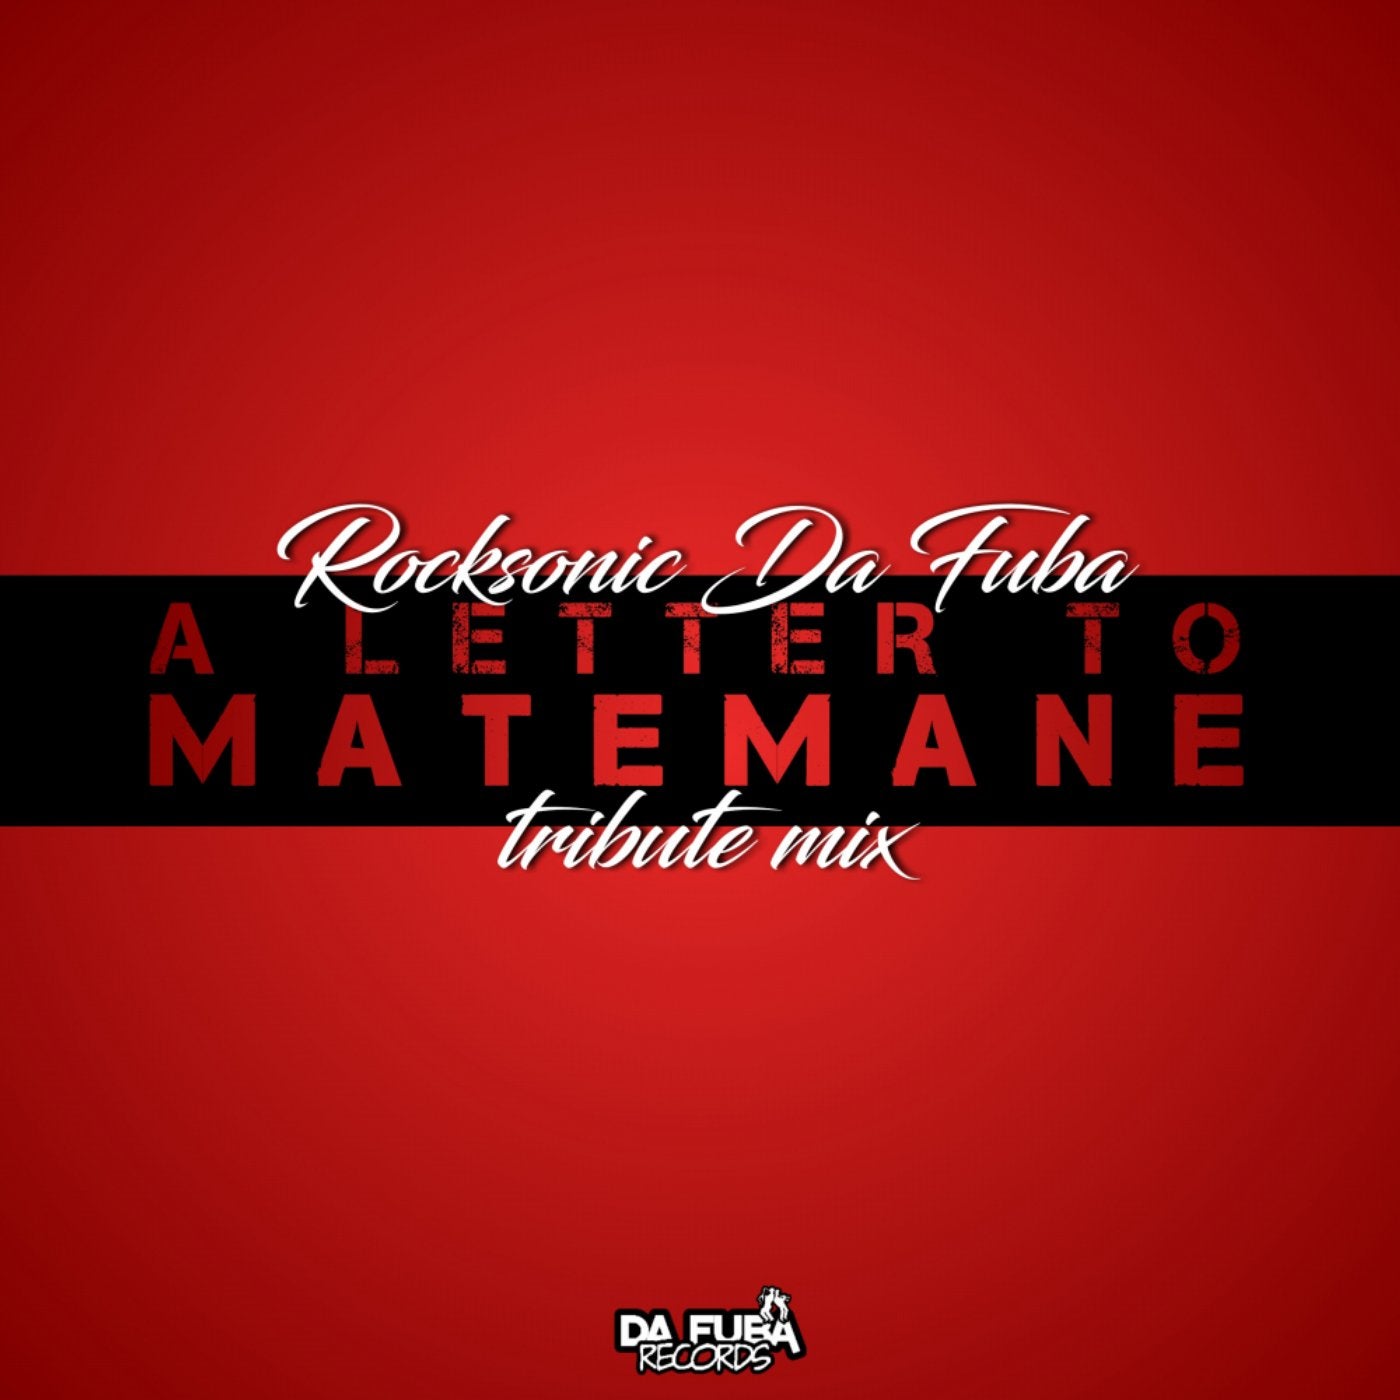 A Letter To Matemane (Tribute Mix)